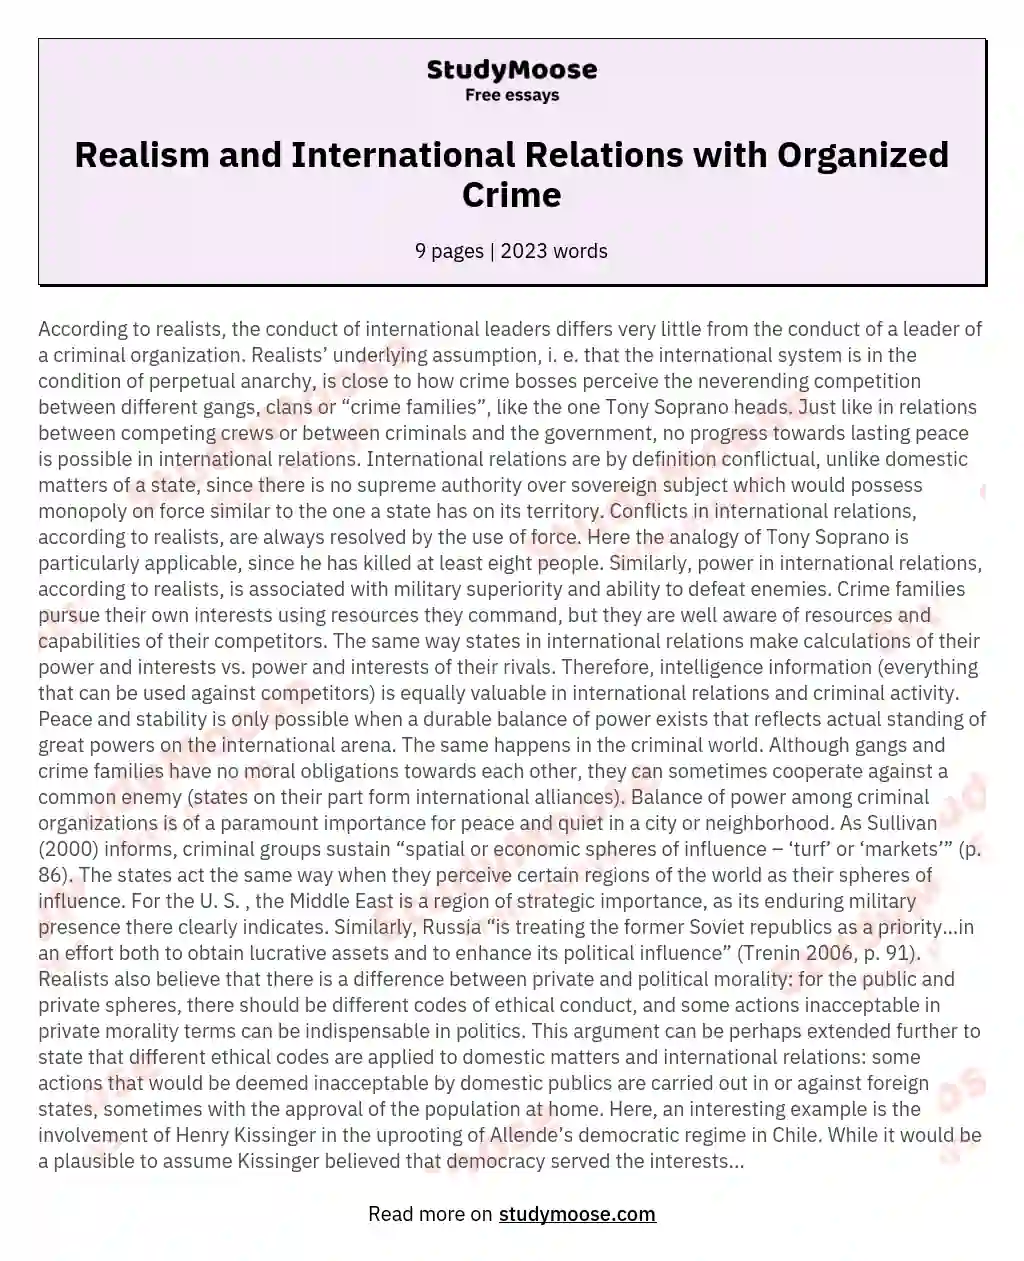 Realism and International Relations with Organized Crime essay